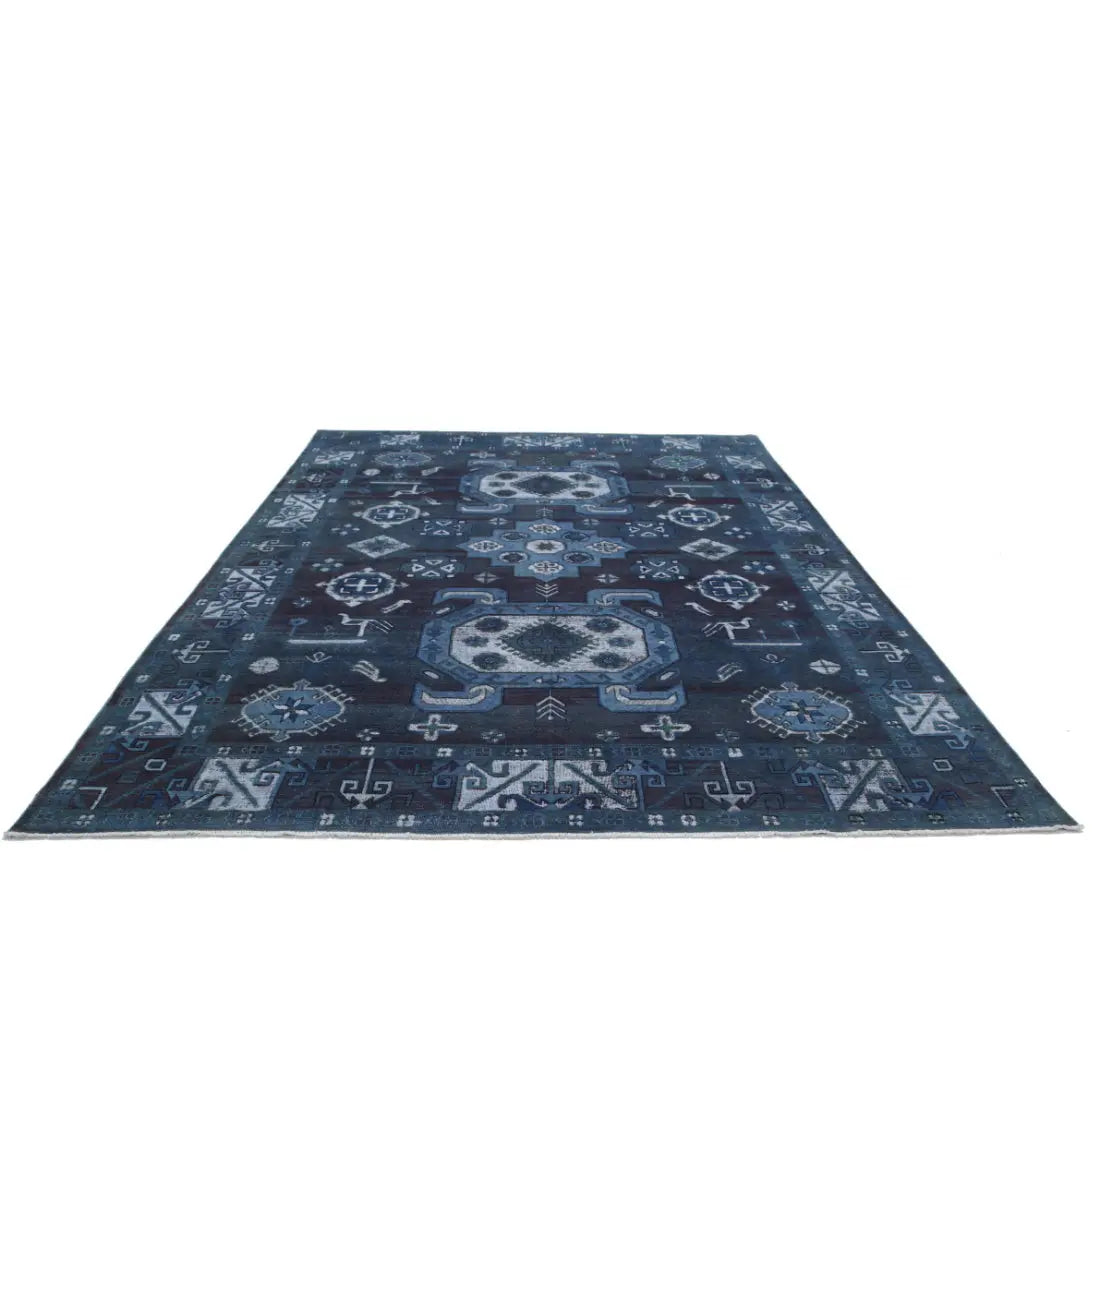 Hand Knotted Onyx Wool Rug - 8'7'' x 11'7''